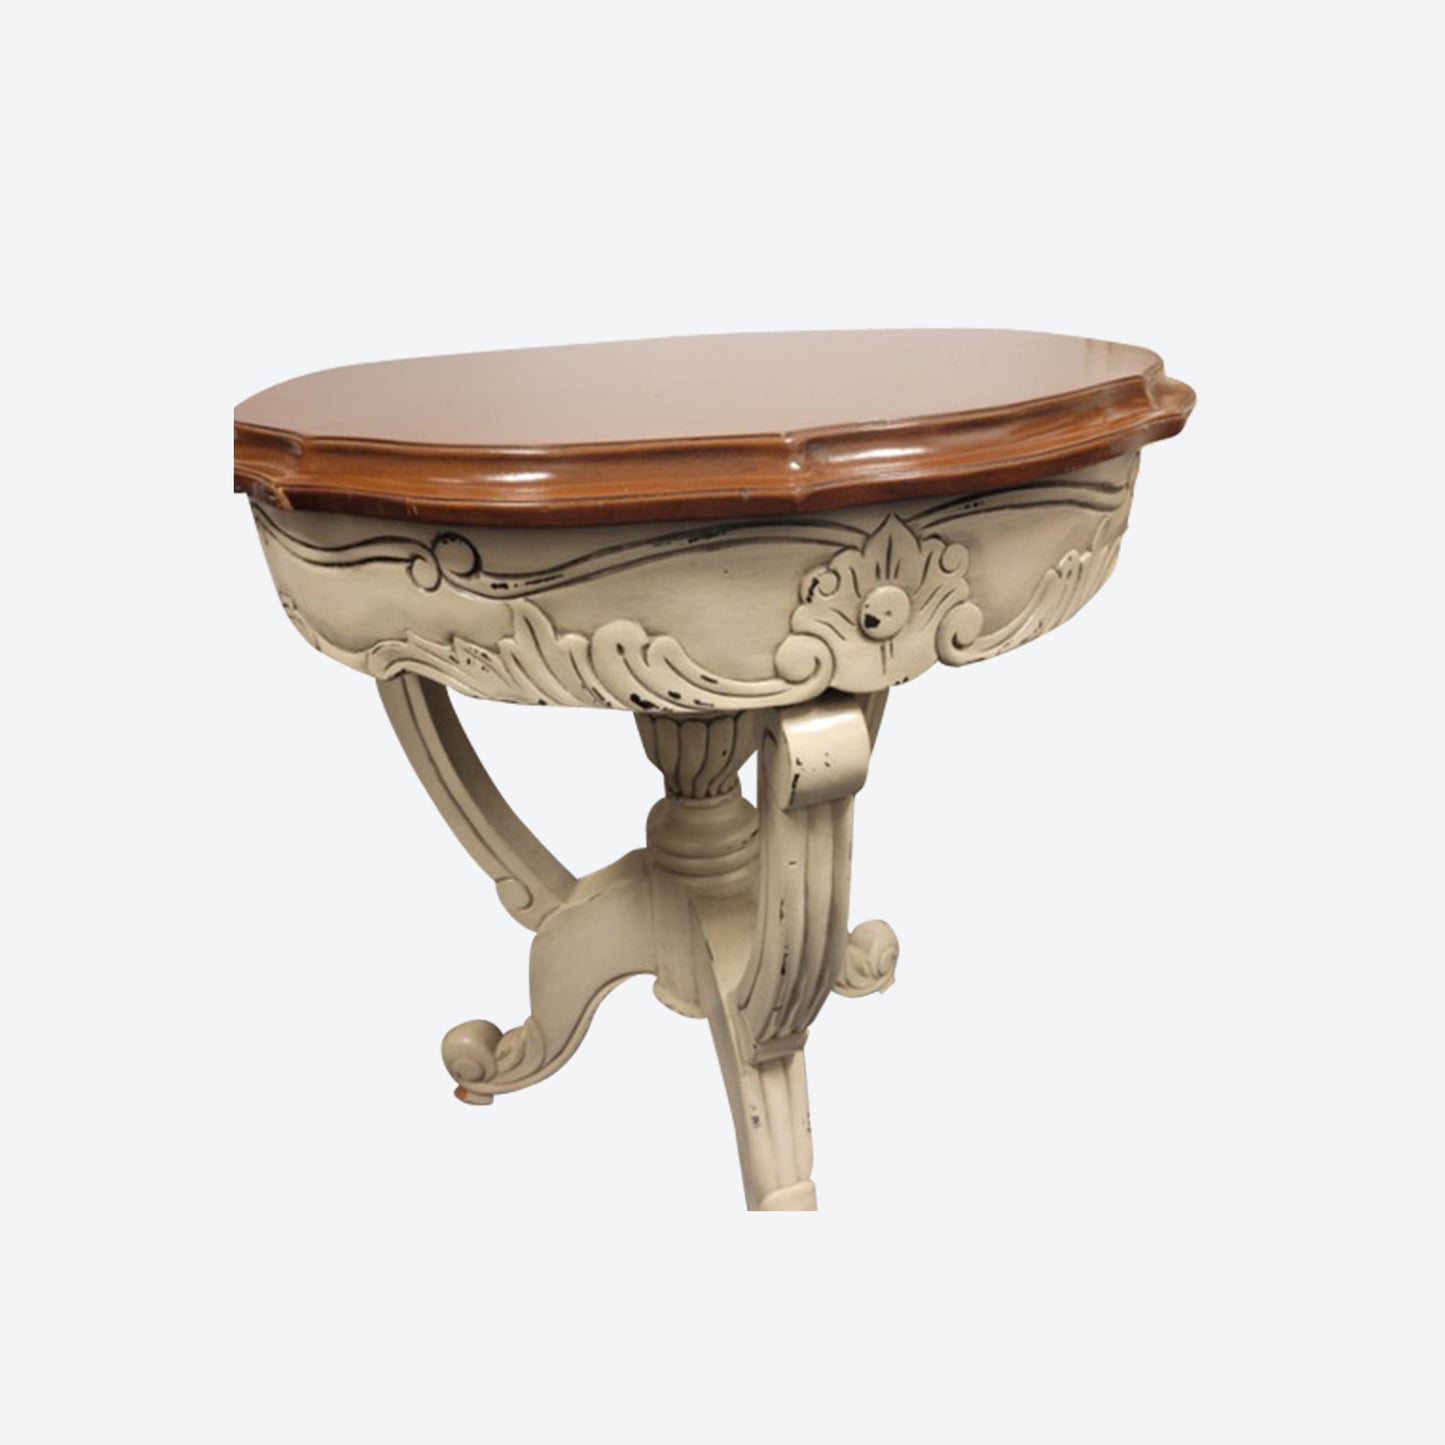 Cedar WOOD ACCENT TABLE WITH WHITE BASE AND LEGS -SK- SKU 1127